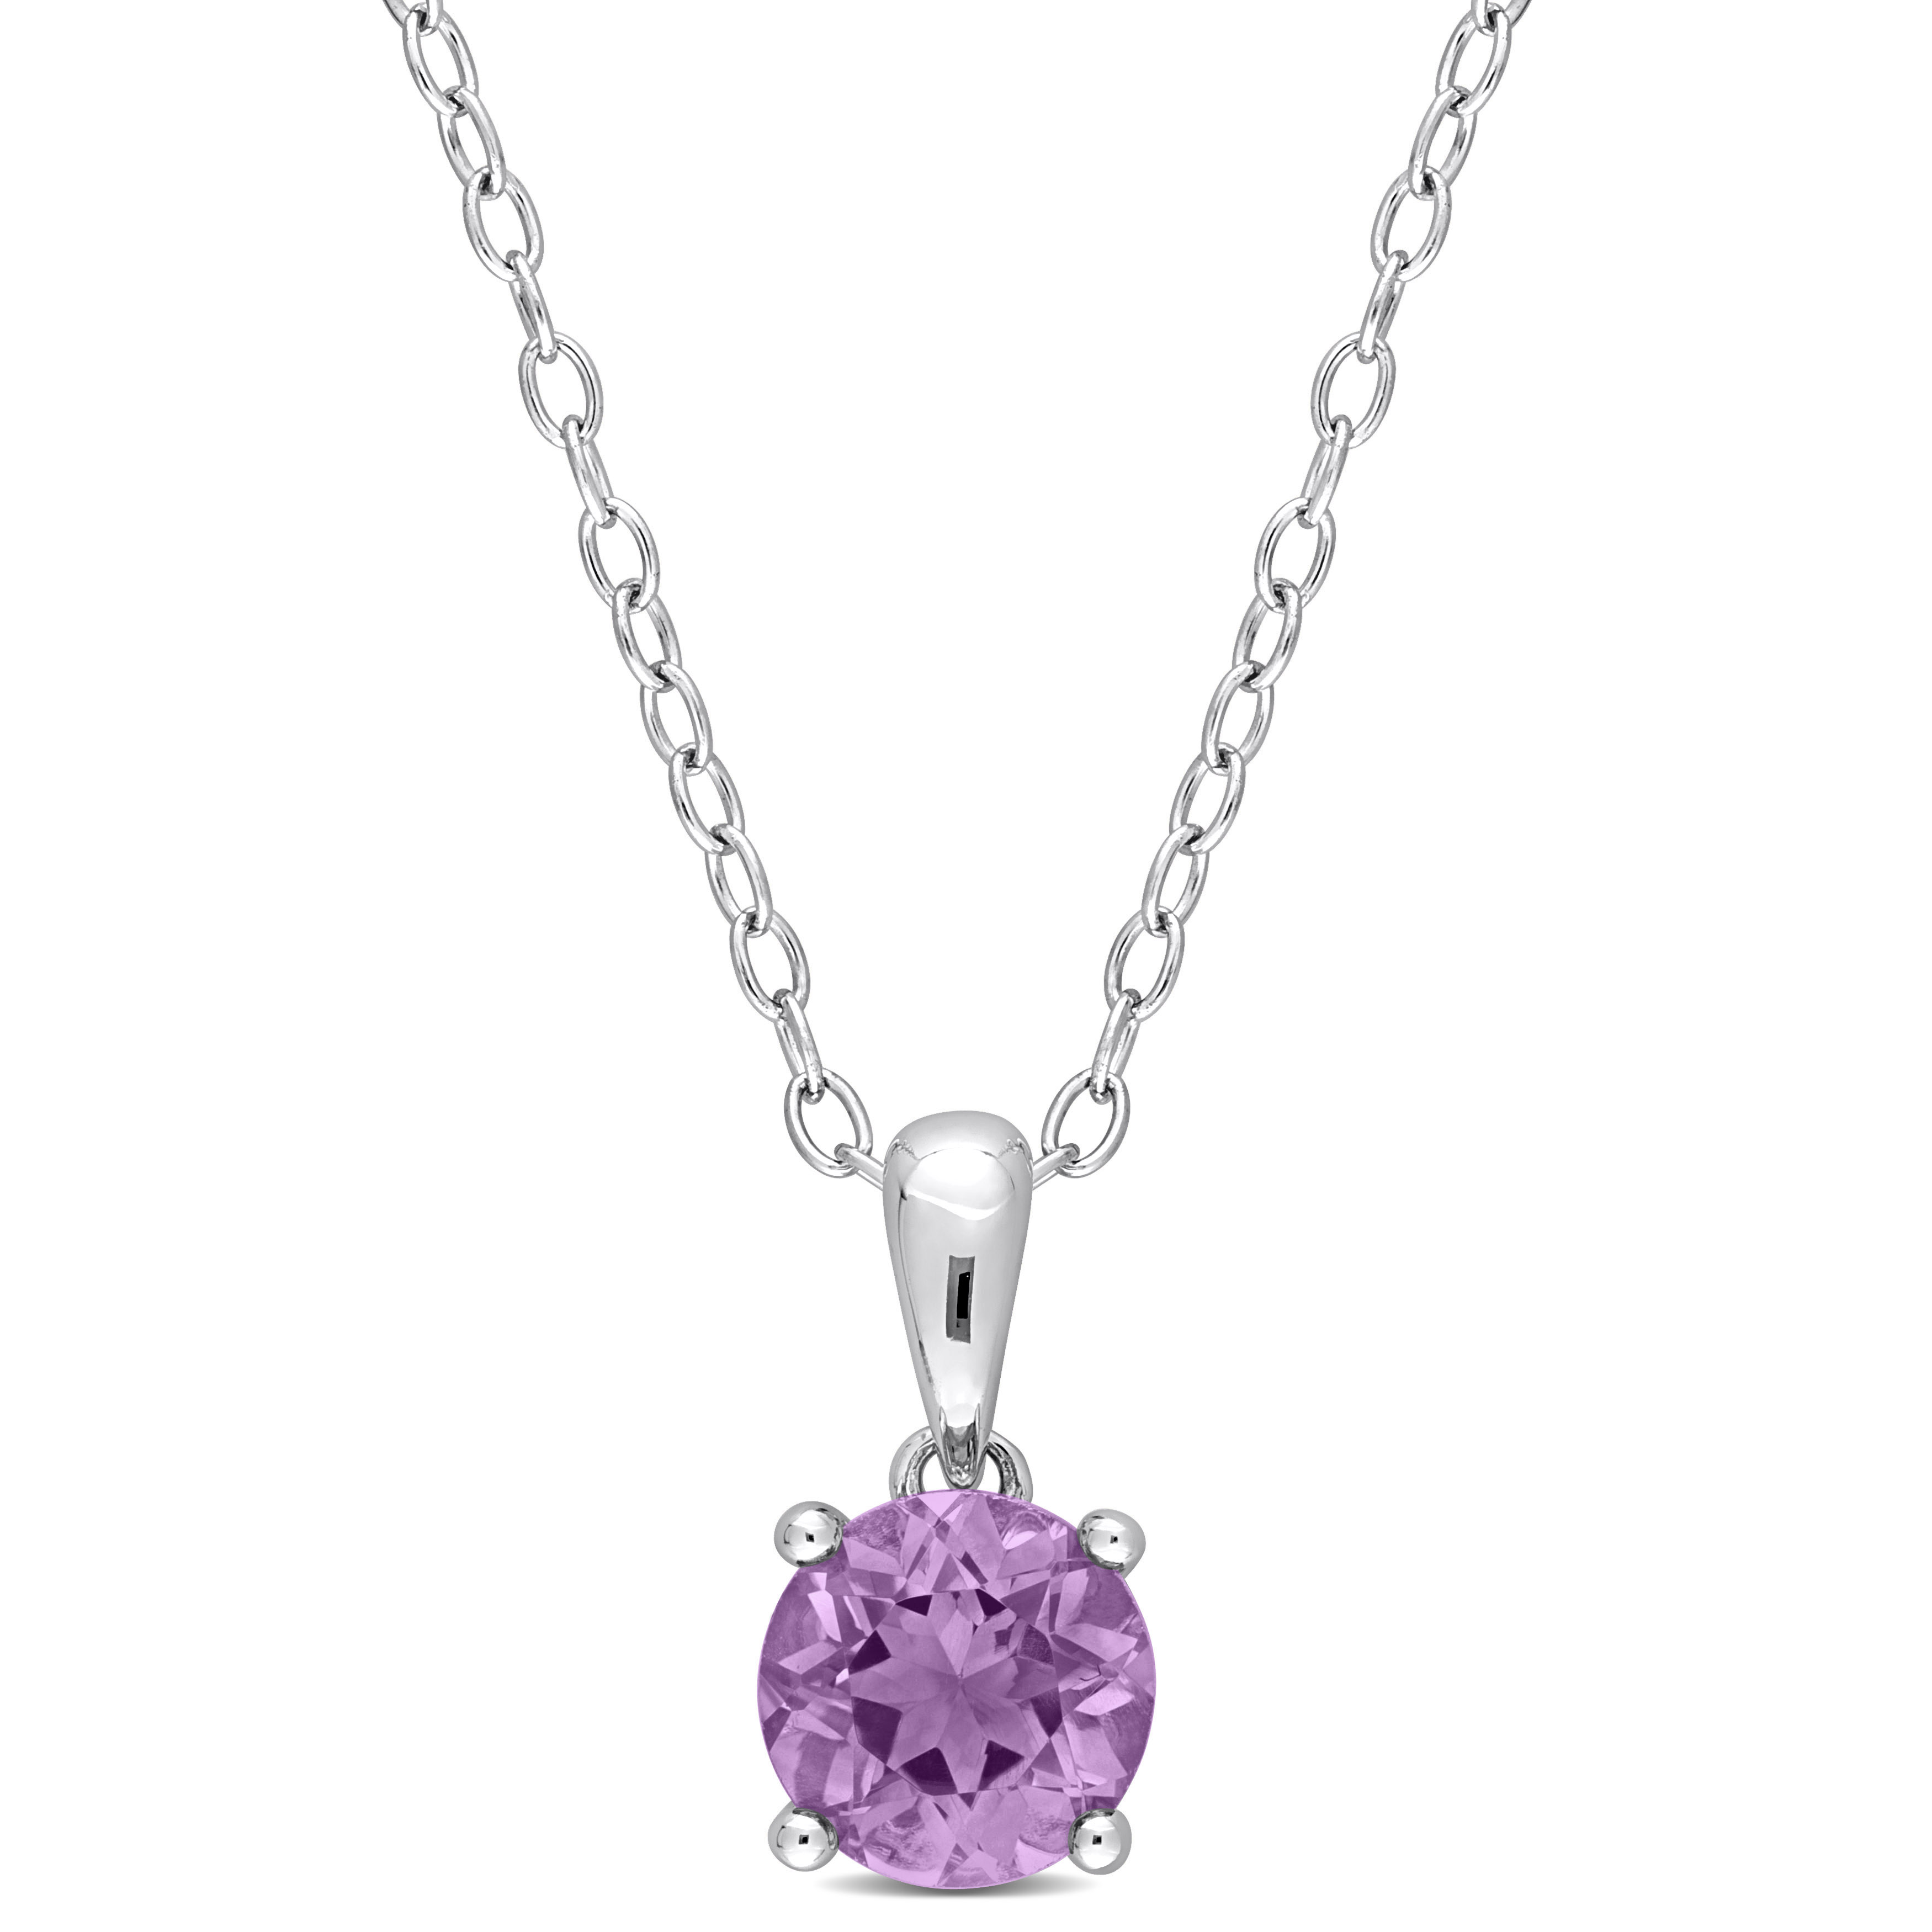 5/8 CT TGW Amethyst Solitaire Heart Design Pendant with Chain in Sterling Silver - 18 in.